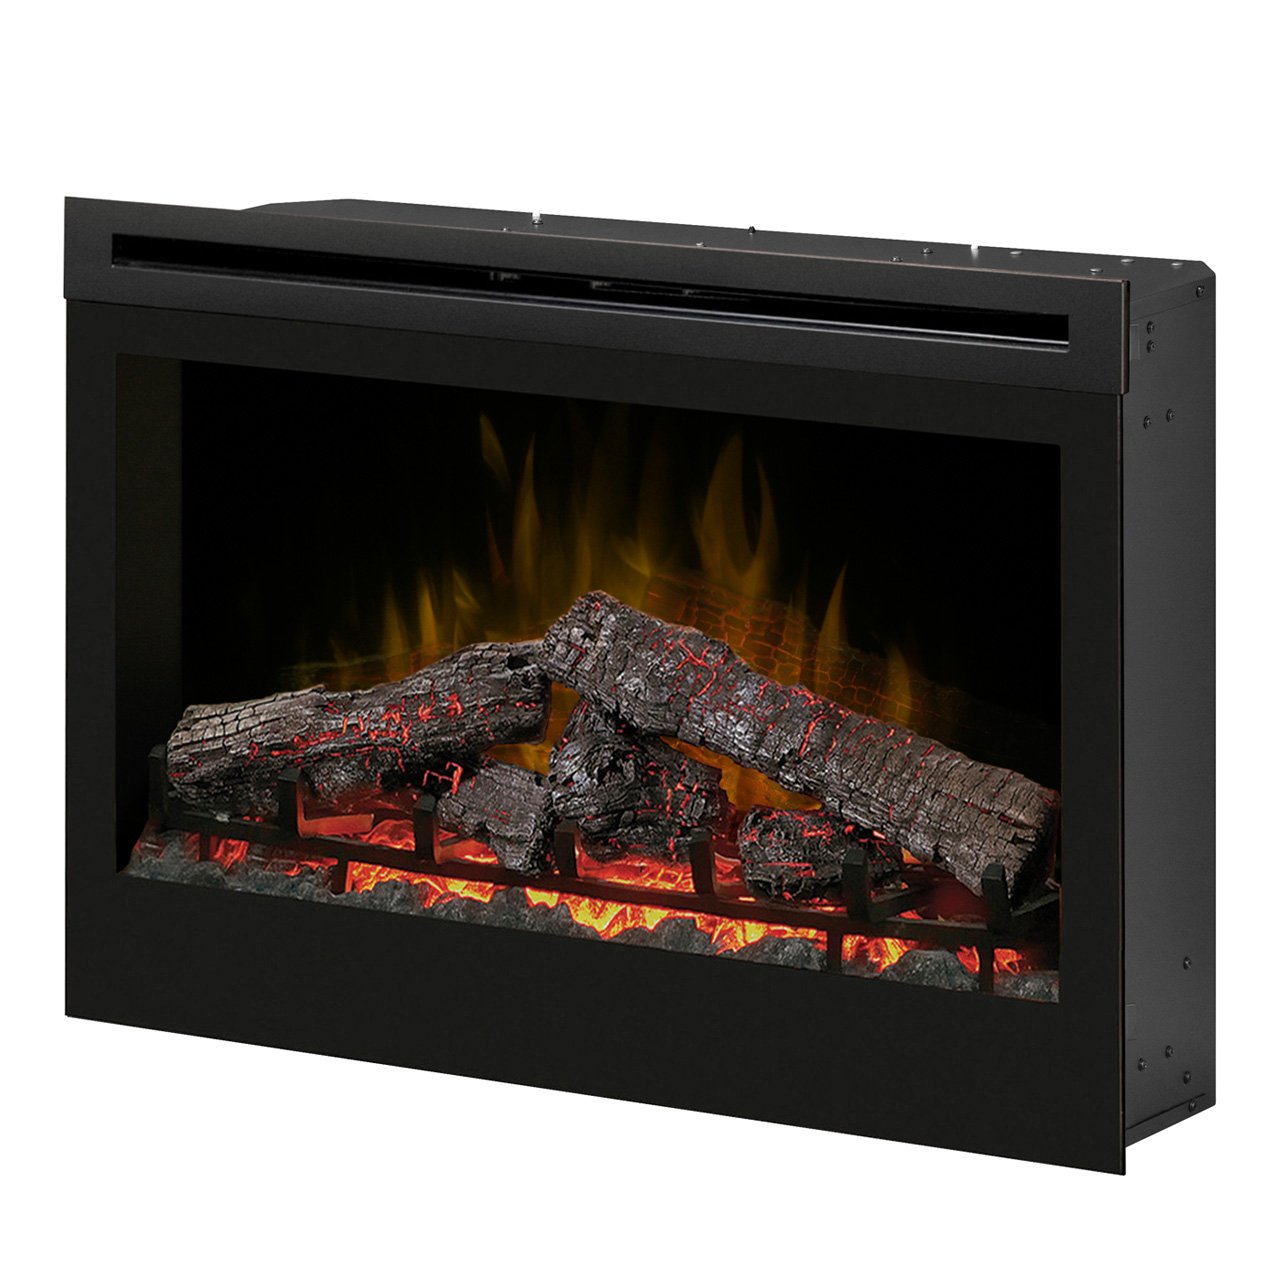 Black Electric Fireplace Luxury Dimplex Df3033st 33 Inch Self Trimming Electric Fireplace Insert